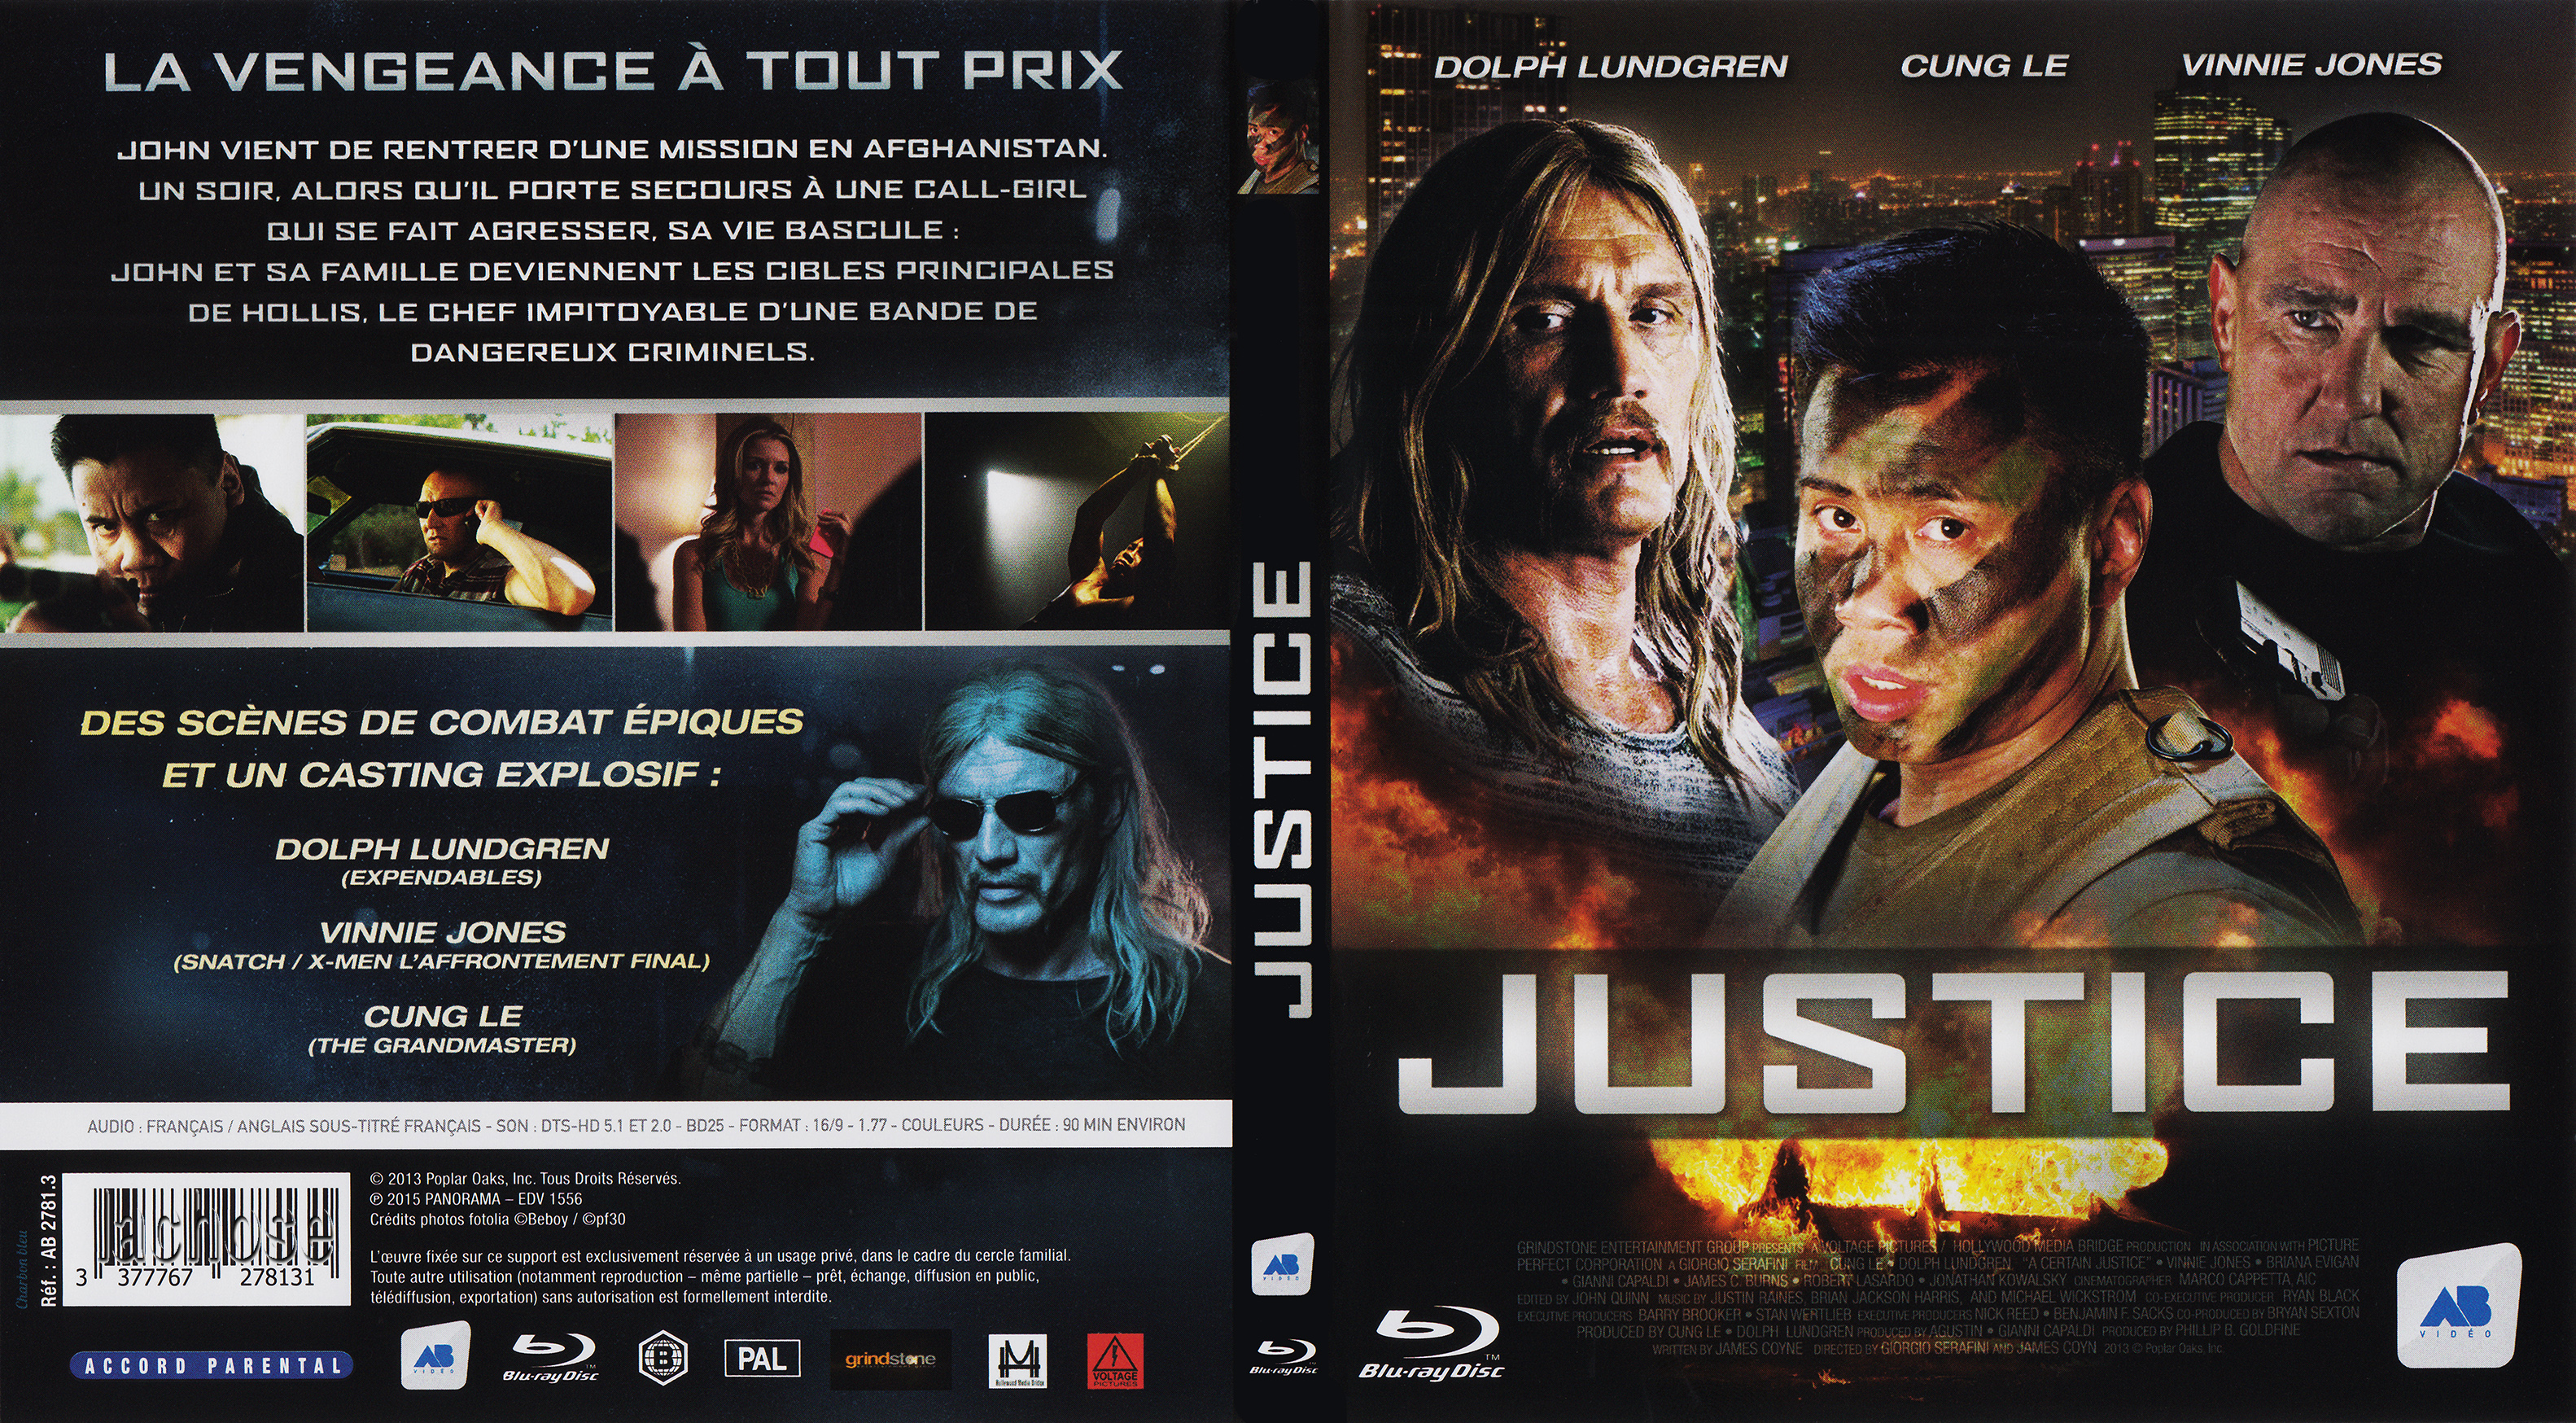 Jaquette DVD Justice 2013 (BLU-RAY)